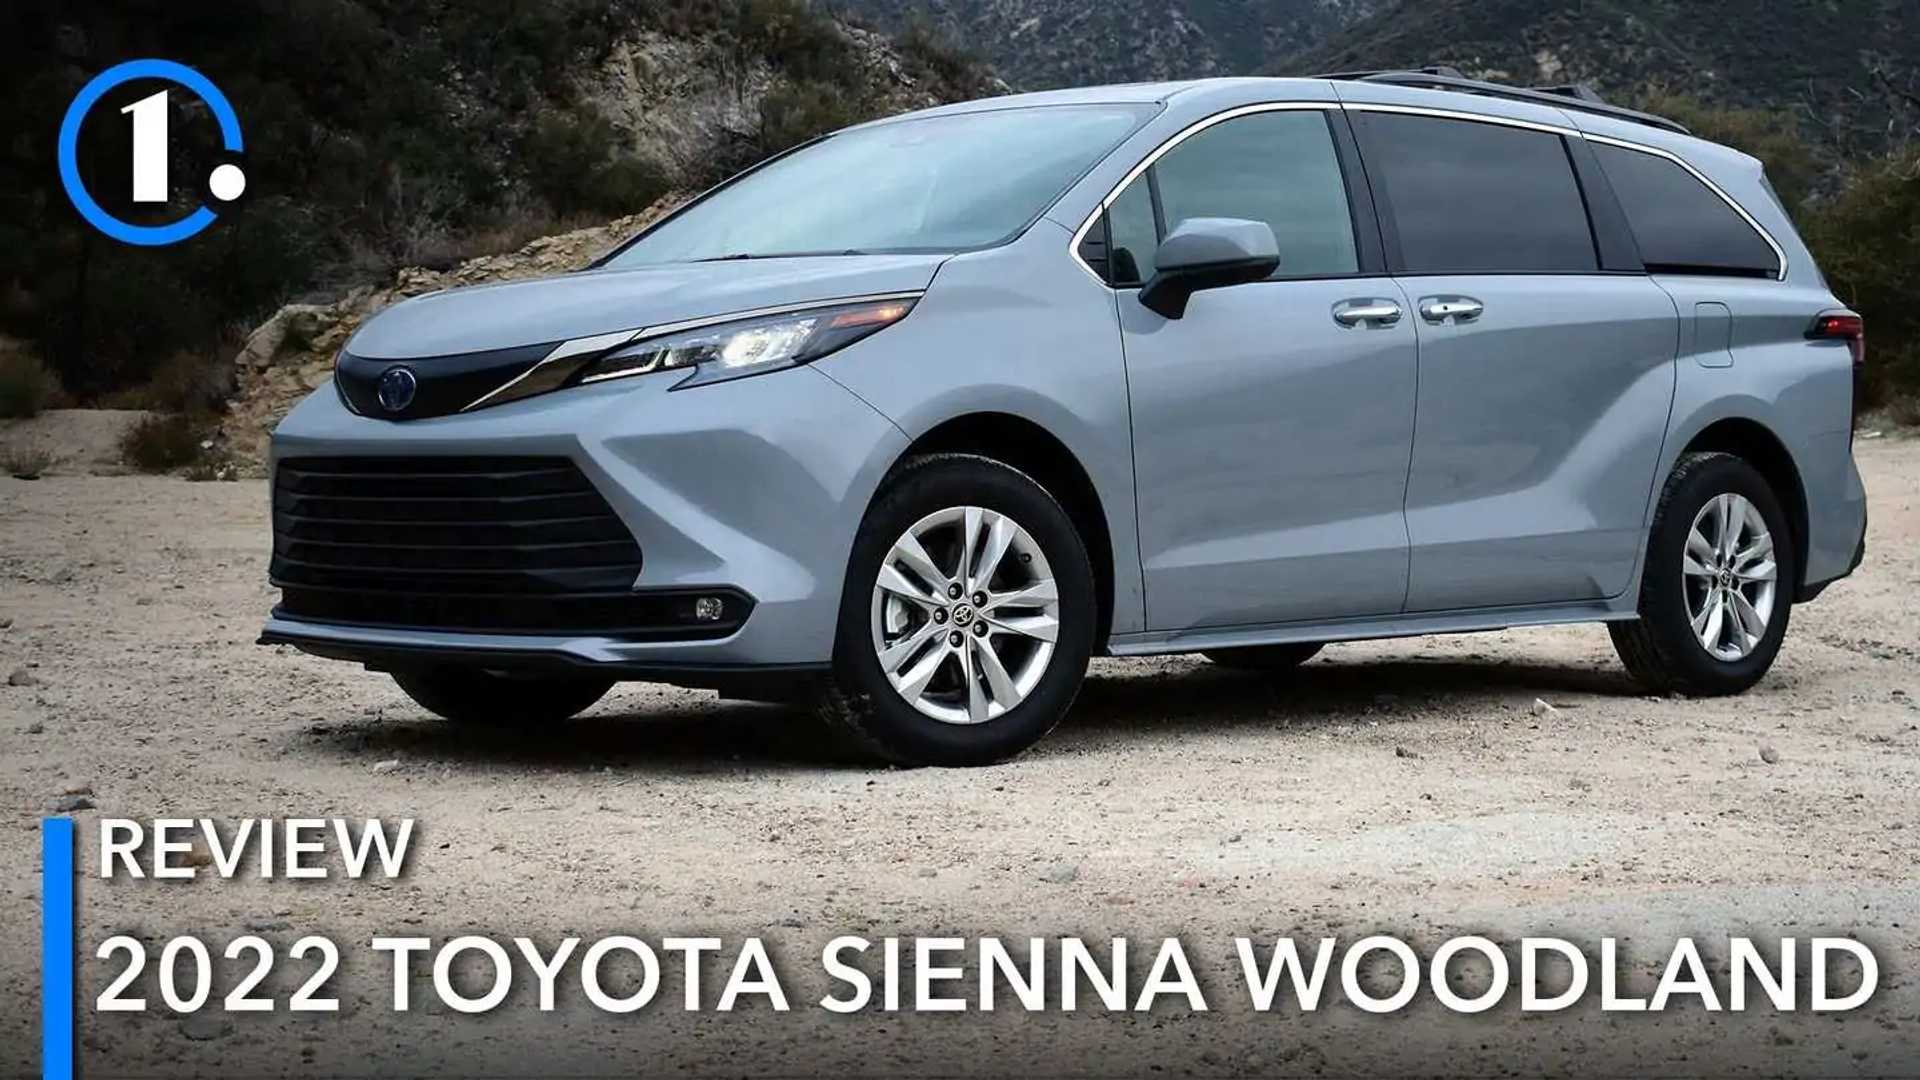 2022 Toyota Sienna Woodland Review: If You Wanna Be My Crossover